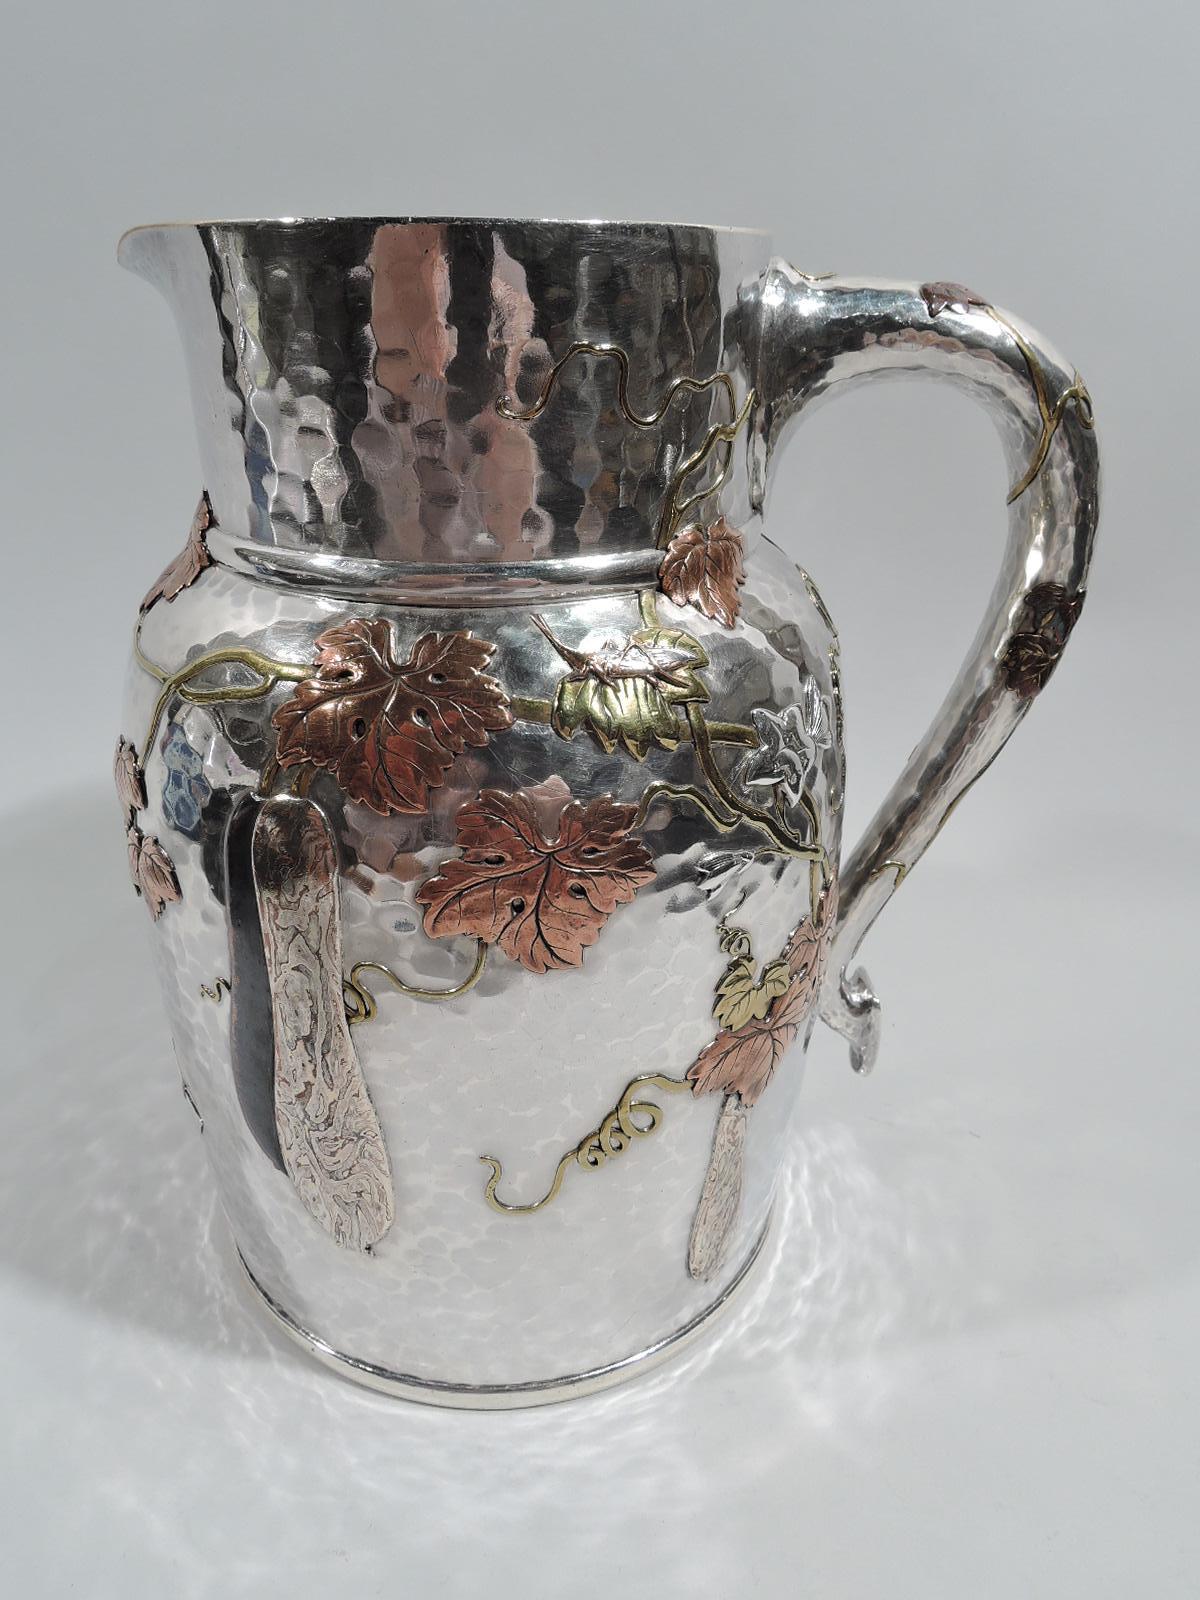 Japonisme Market-Fresh Tiffany Japonesque Mixed Metal Dragonfly Water Pitcher